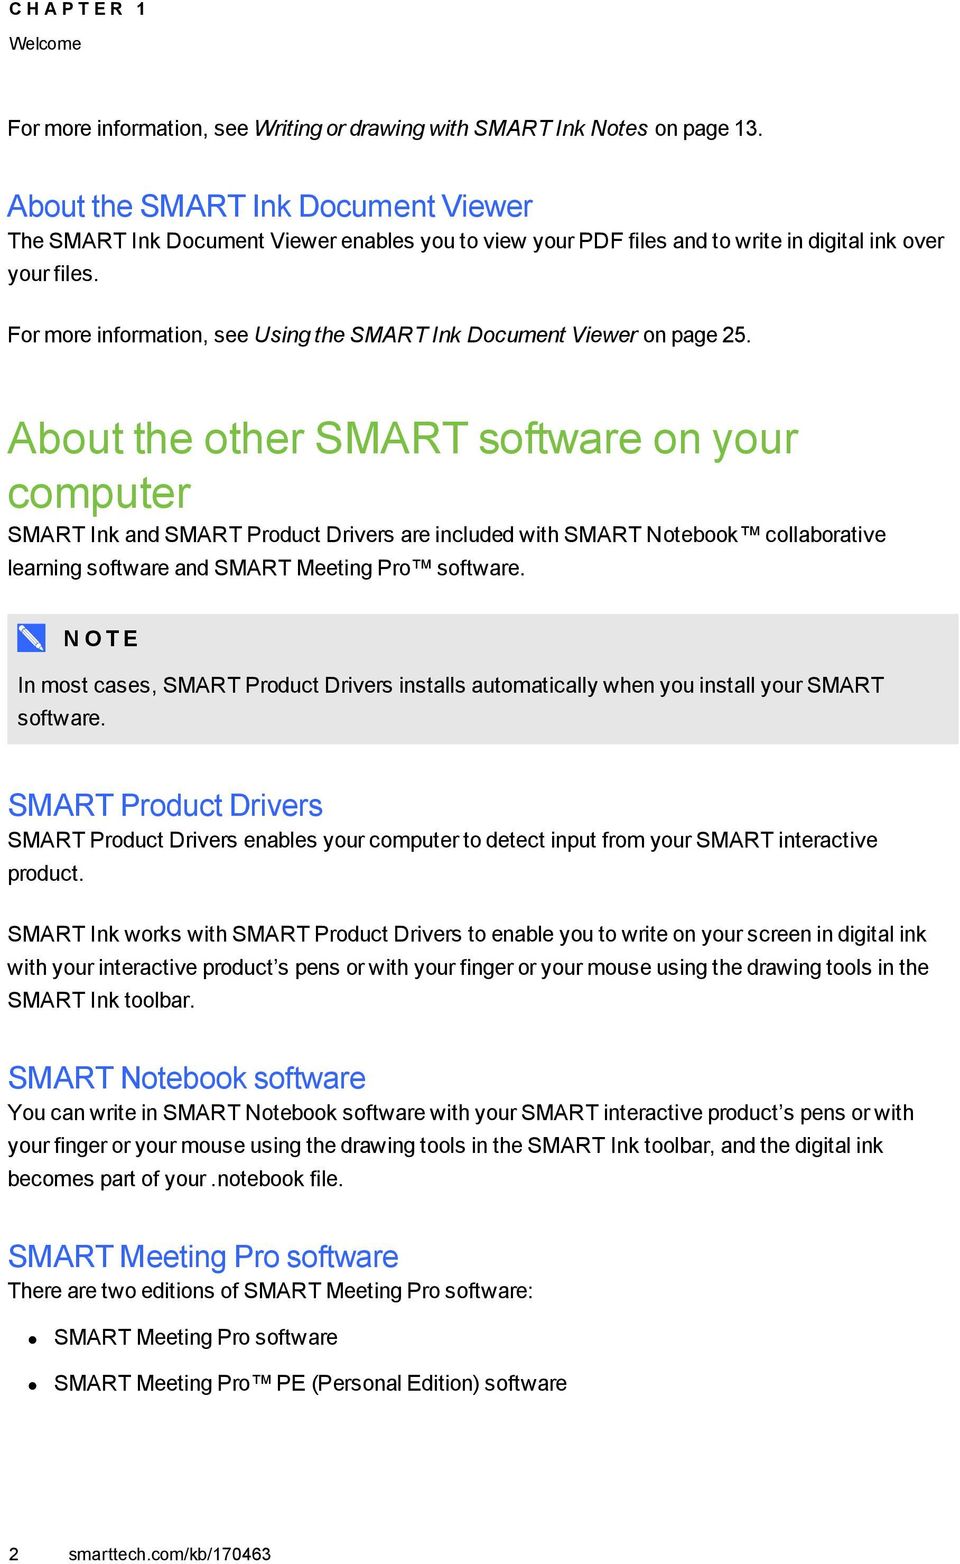 For more information, see Using the SMART Ink Document Viewer on page 25.